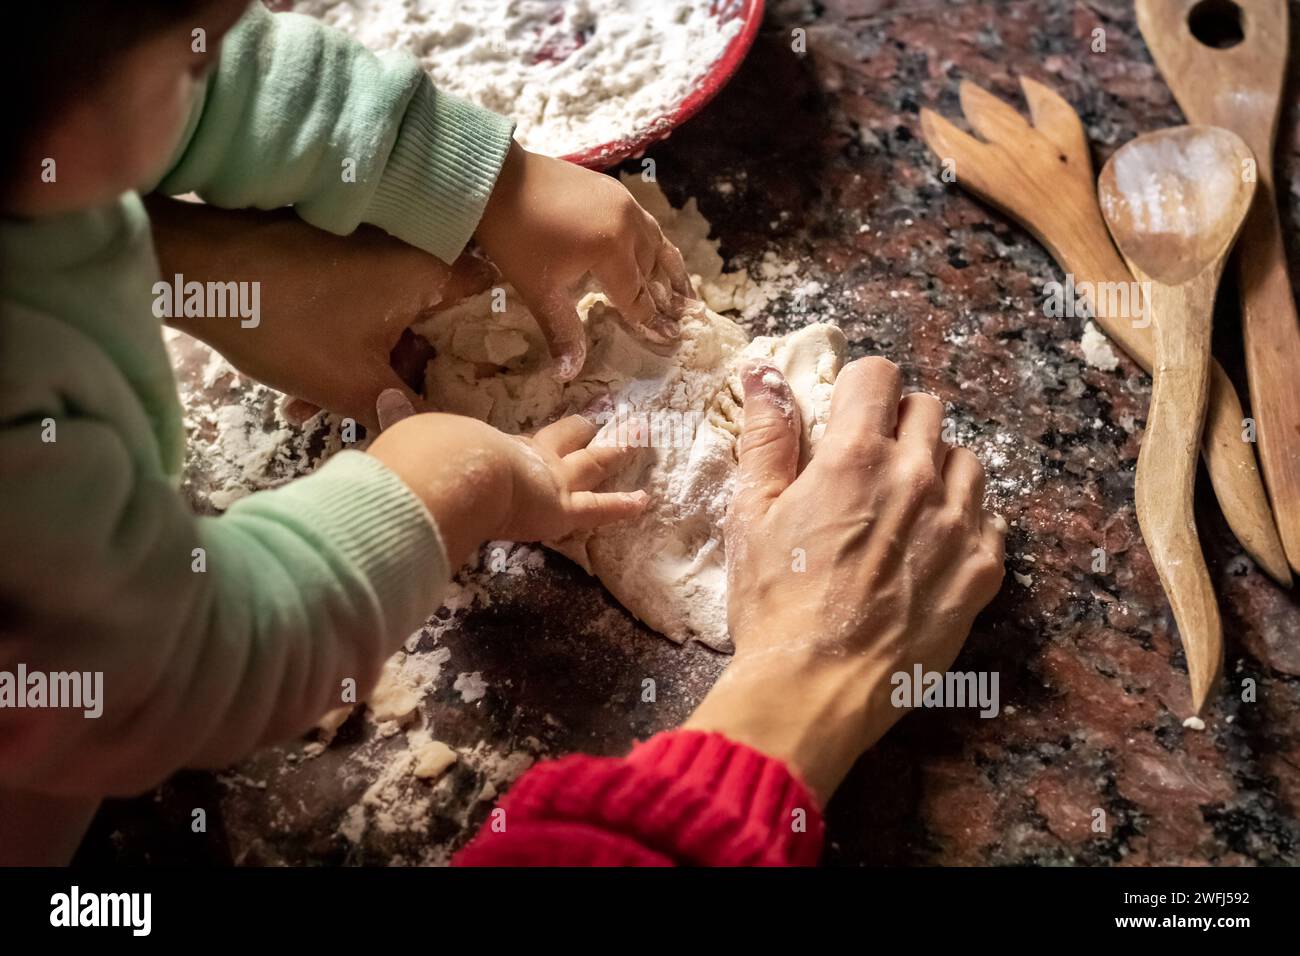 A woman and child collaborate in the kitchen, kneading dough Stock Photo